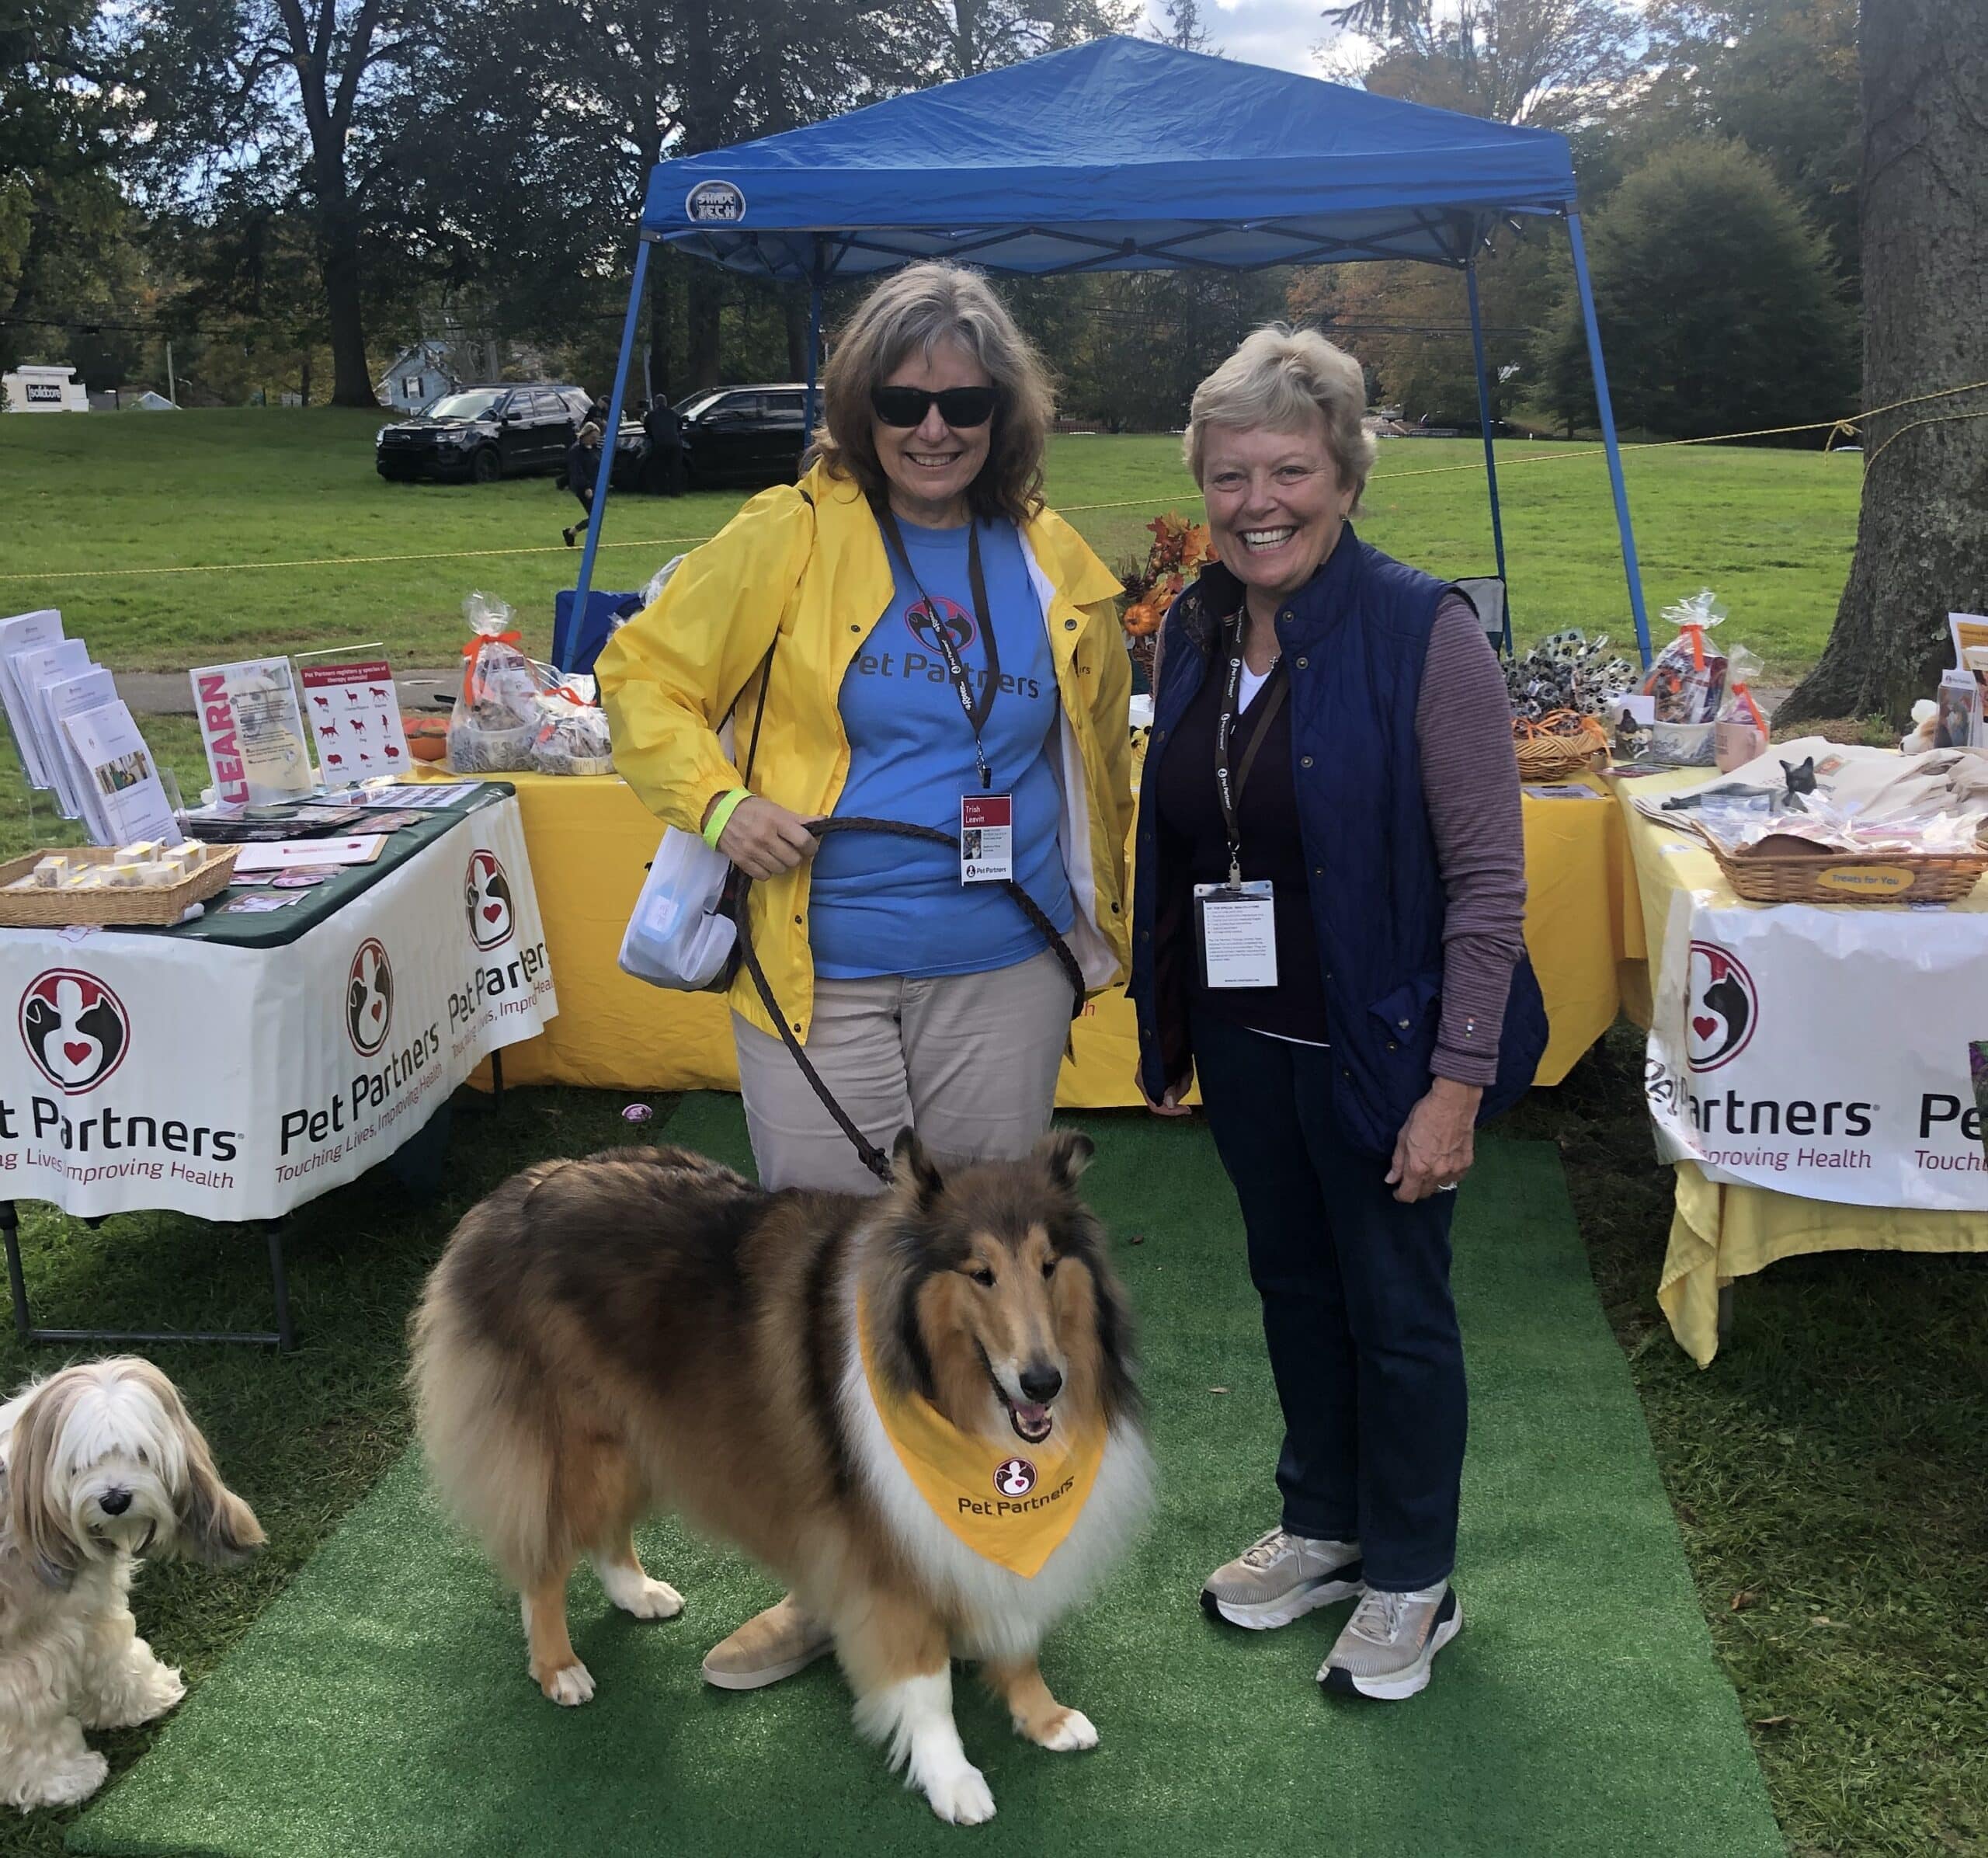 A therapy dog handler with her rough collie therapy dog and another Pet Partners volunteer post in front of the Pet Partners booth at the Westport Dog Festival.